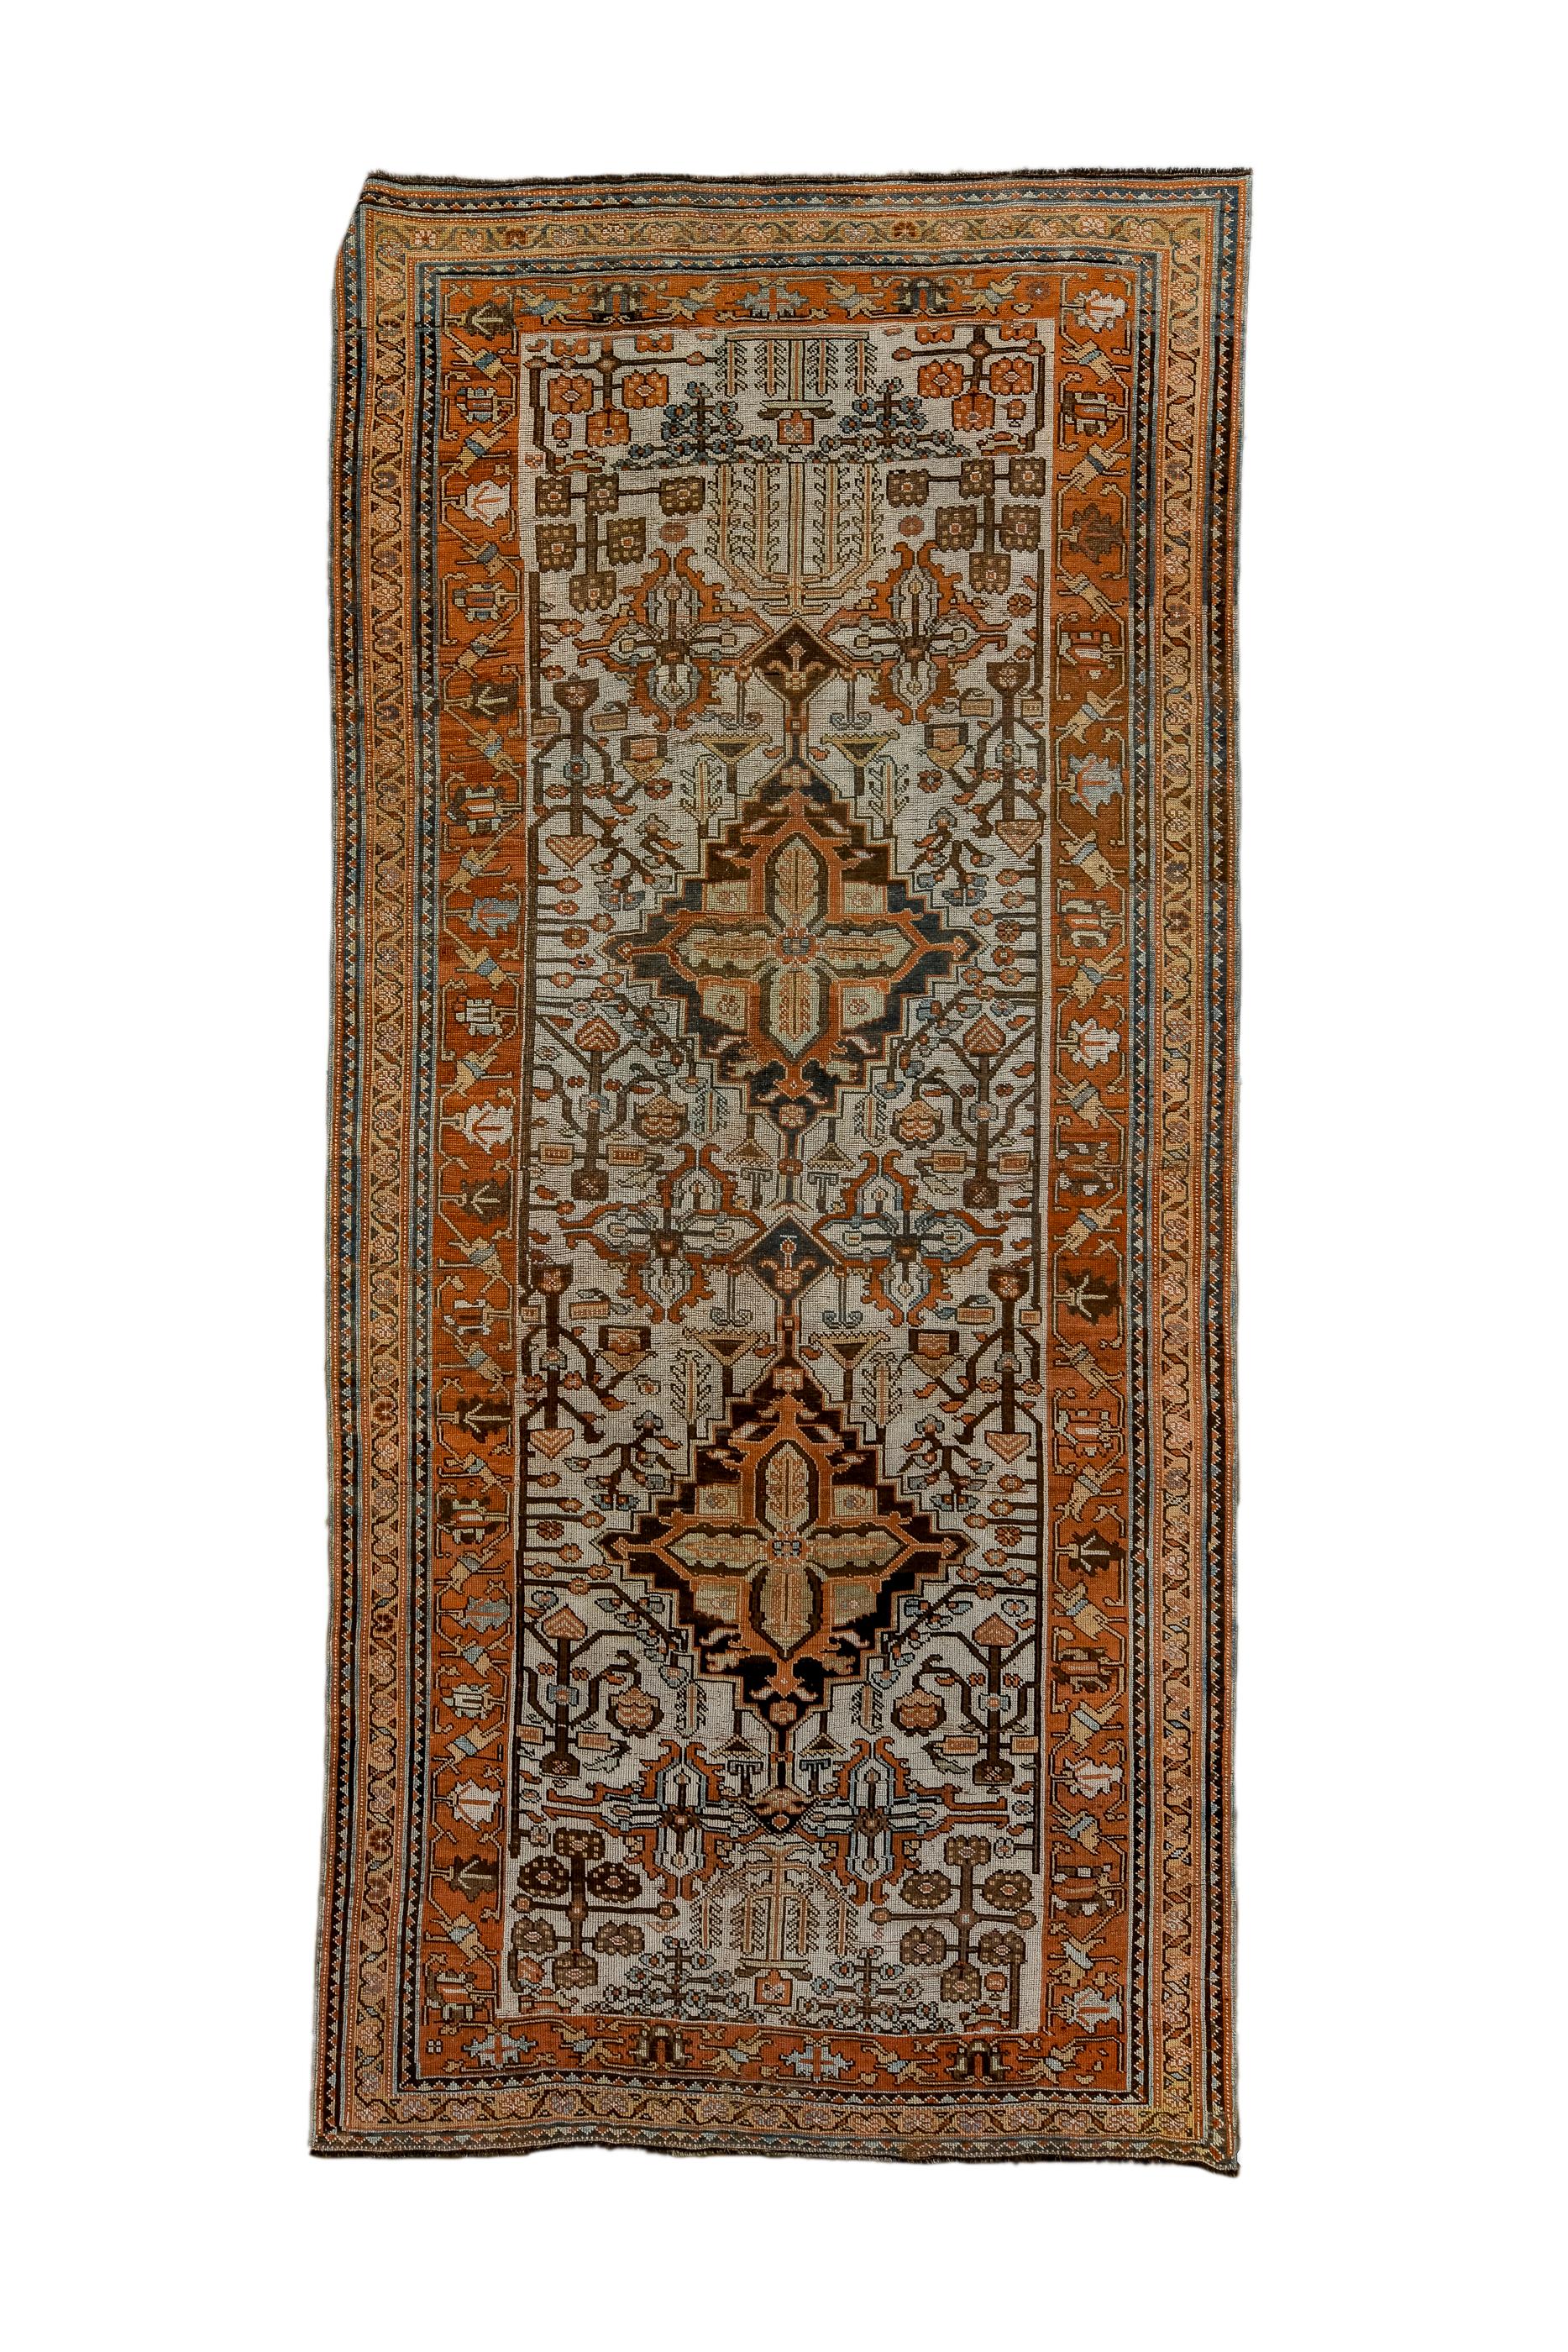 This interesting village kellegi (long rug) features two stepped chocolate medallions against an ecru field filled with semi-geometric flowers, weeping willows, four palmette crosses, dangling flowerheads and other amusing devices. The rust main